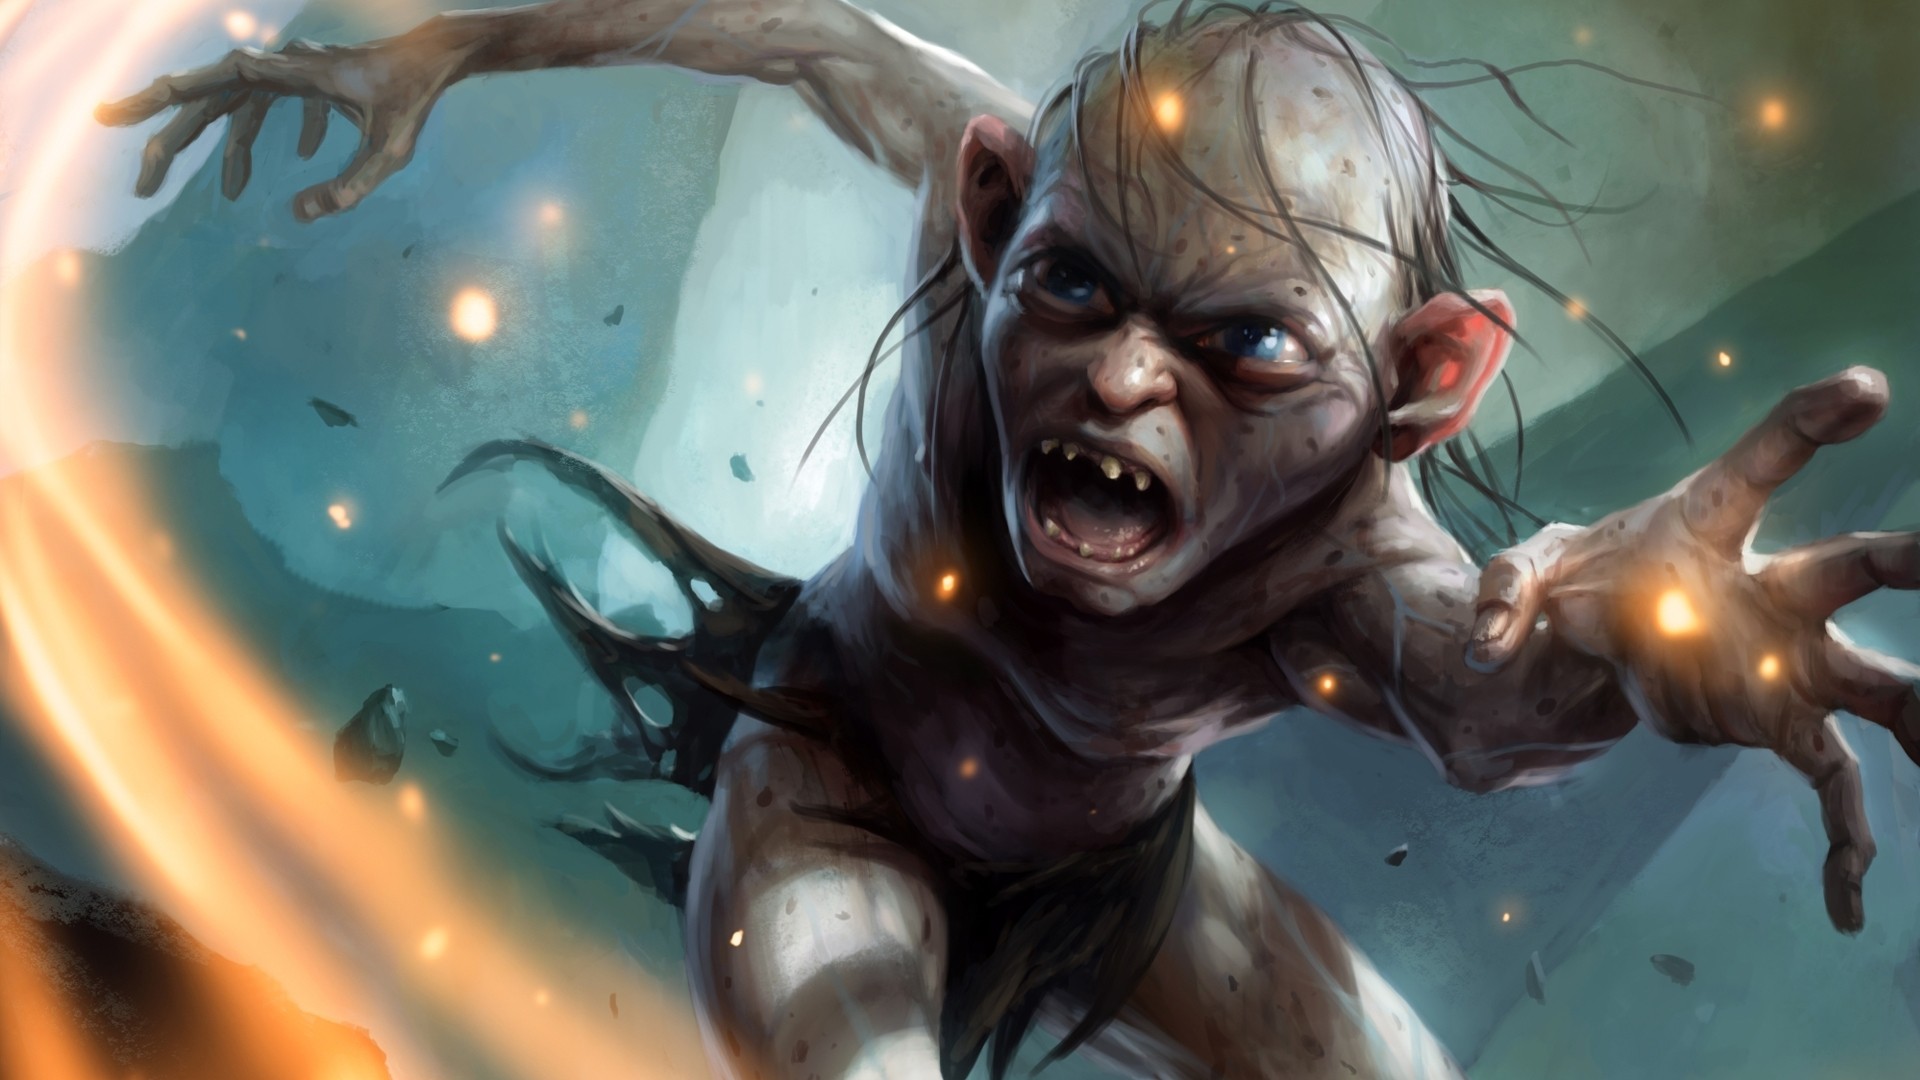 General 1920x1080 Guardians of Middle-earth Gollum The Lord of the Rings fantasy art creature